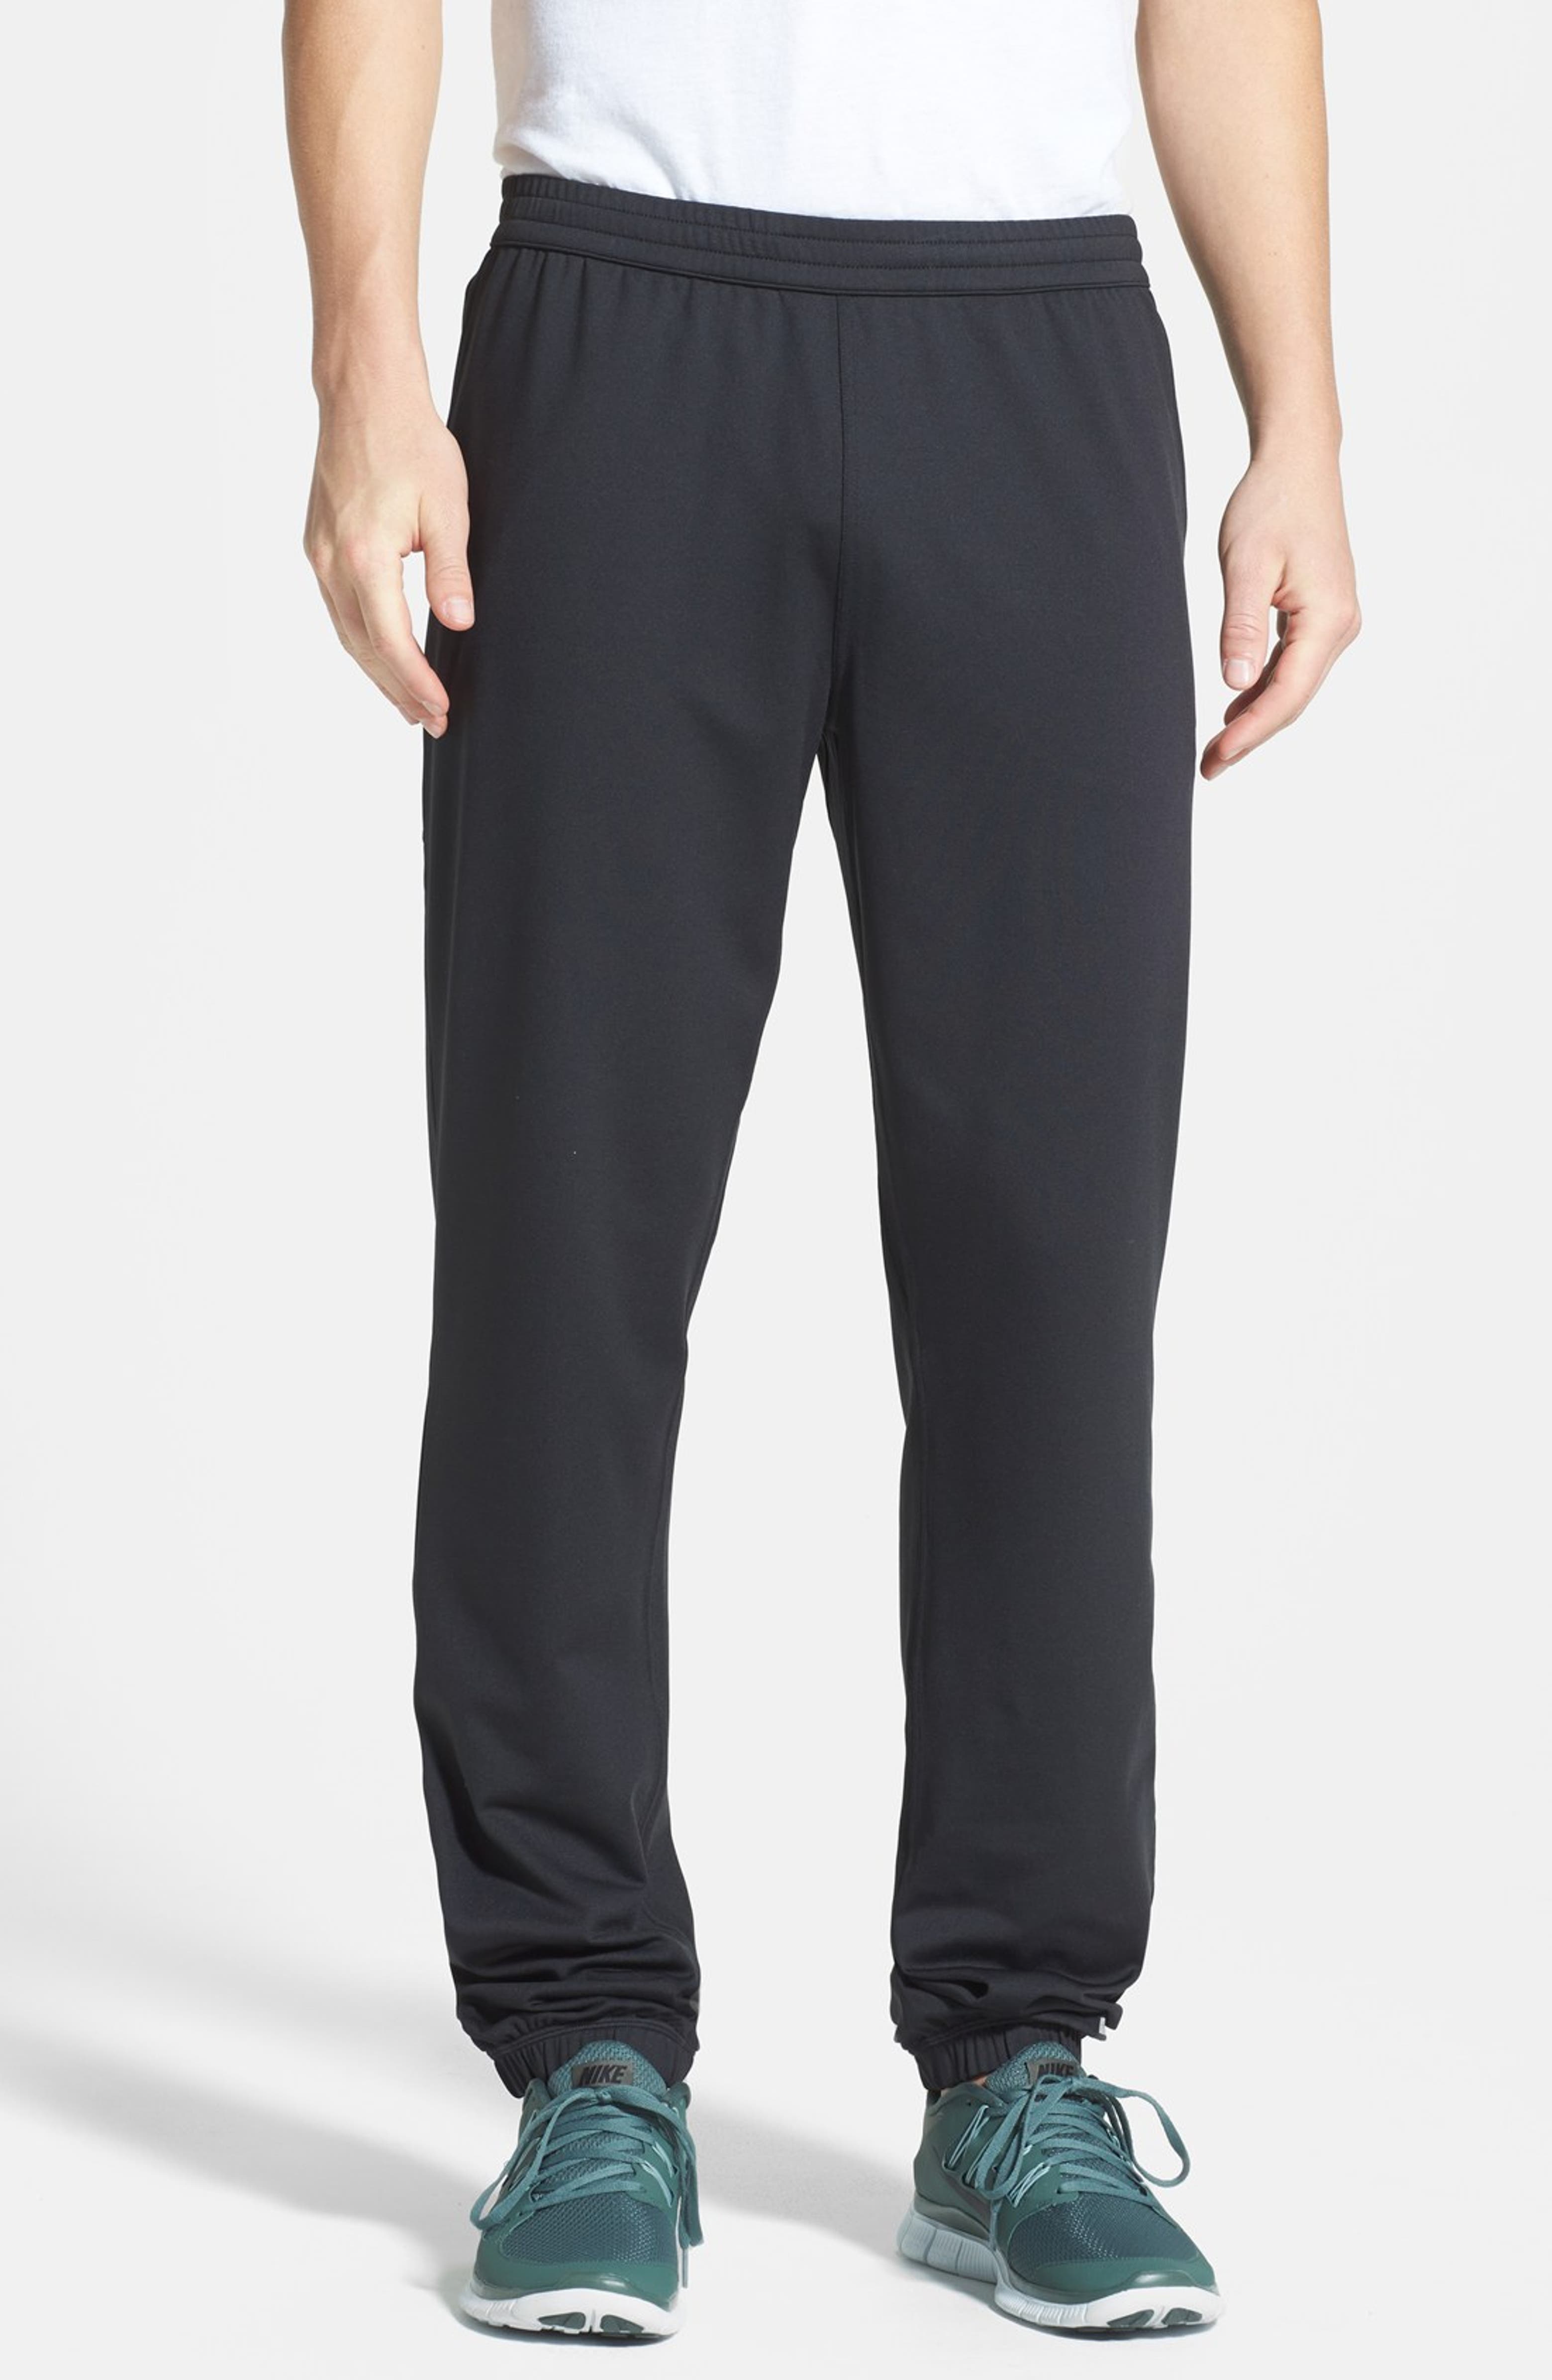 BPM Fueled by Zella Moisture Wicking Athletic Pants | Nordstrom